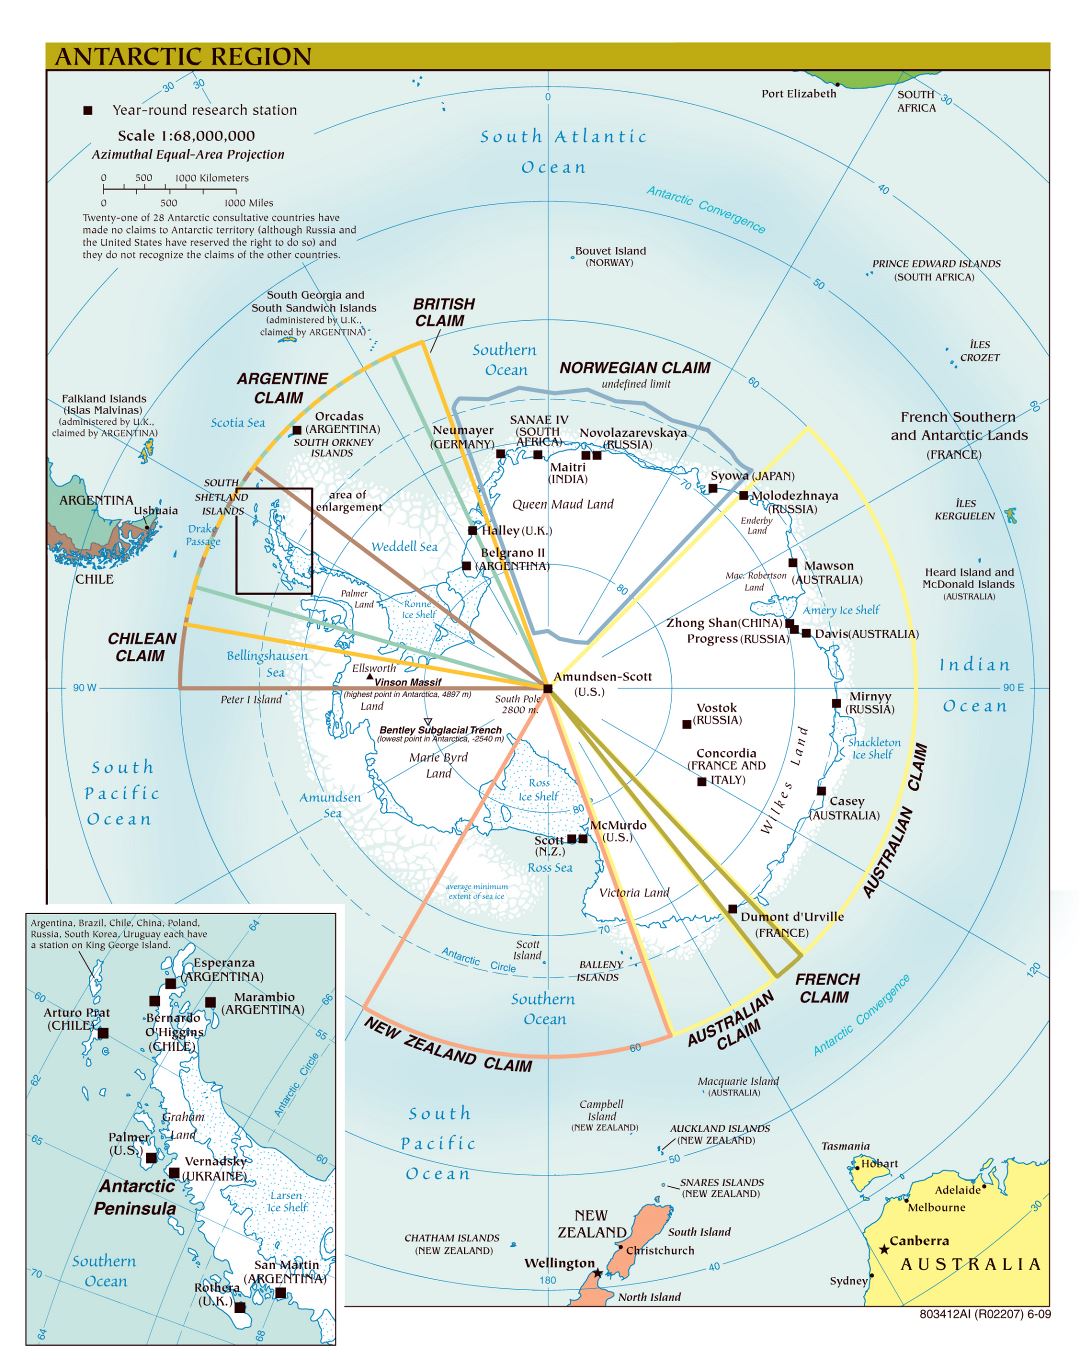 Large scale detailed political map of Antarctic Region - 2009